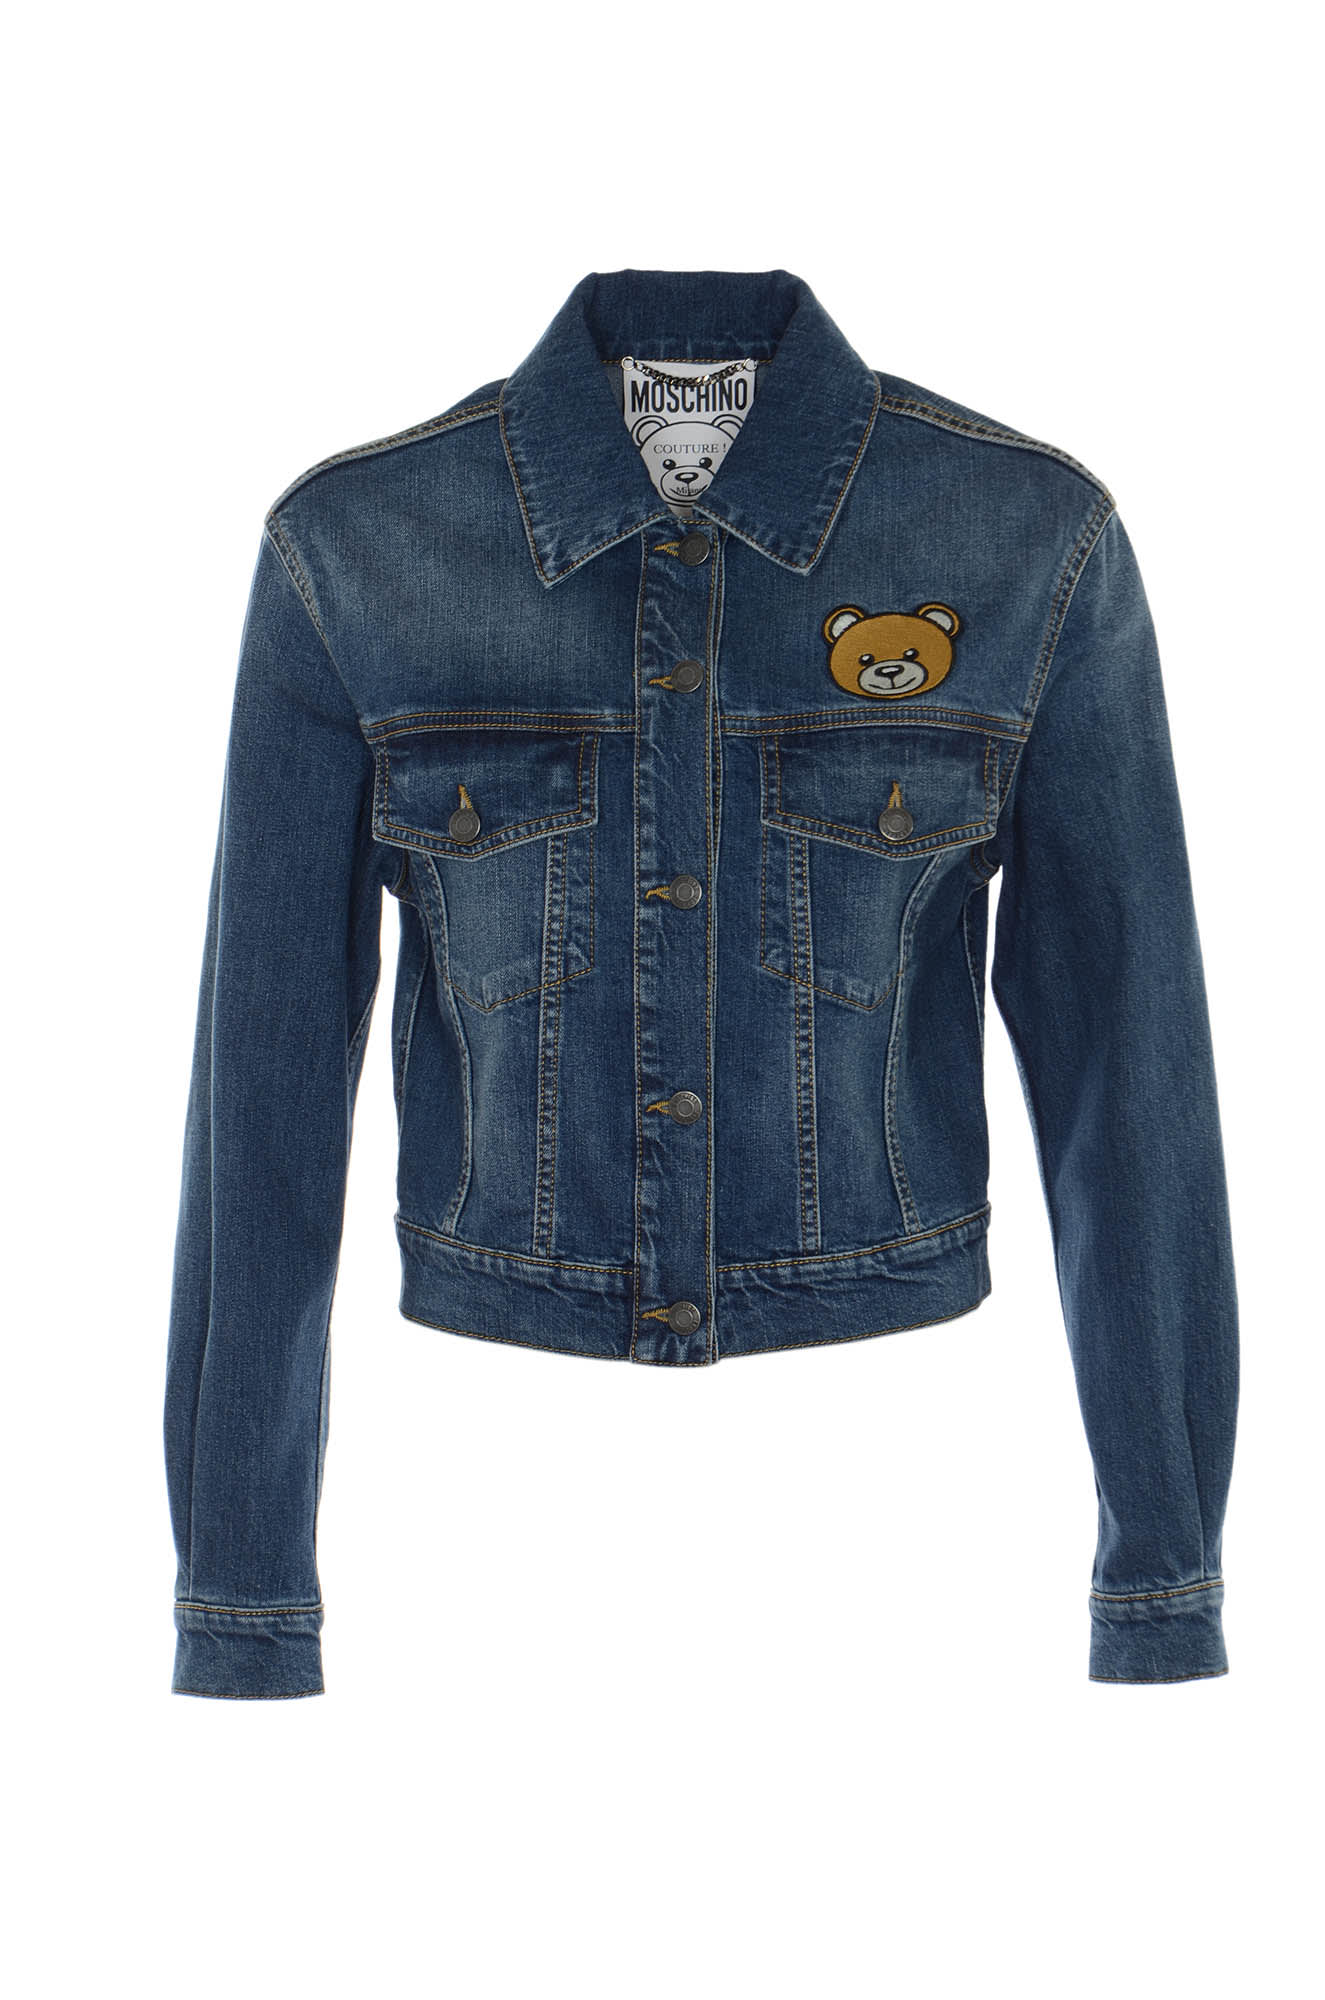 Moschino Bear Patched Denim Jacket